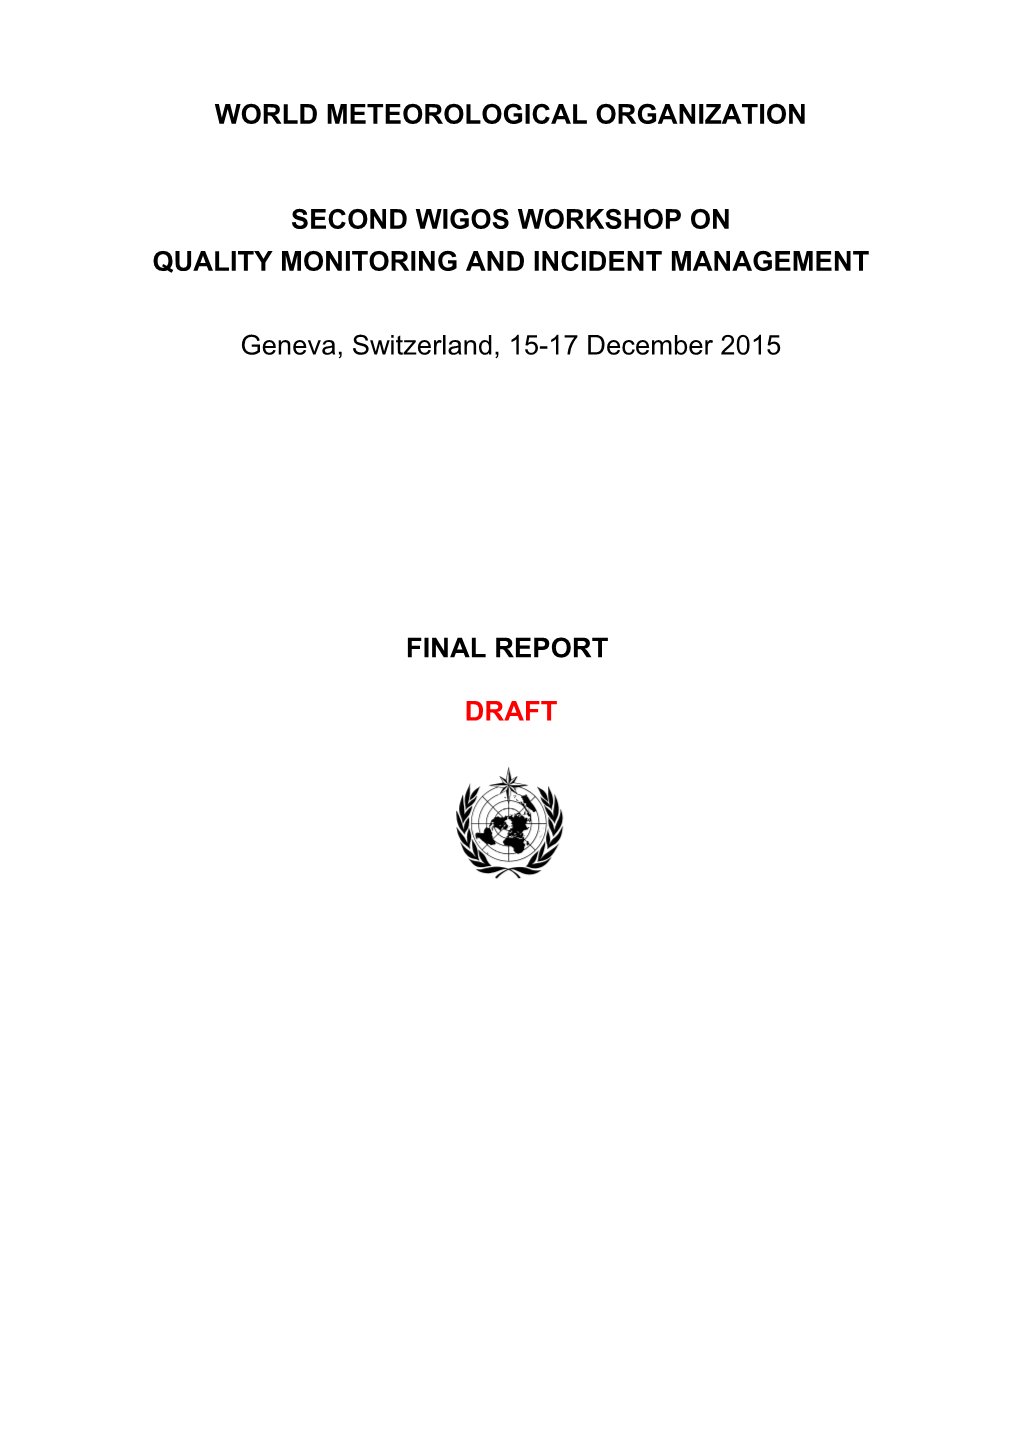 Quality Monitoring and Incident Management